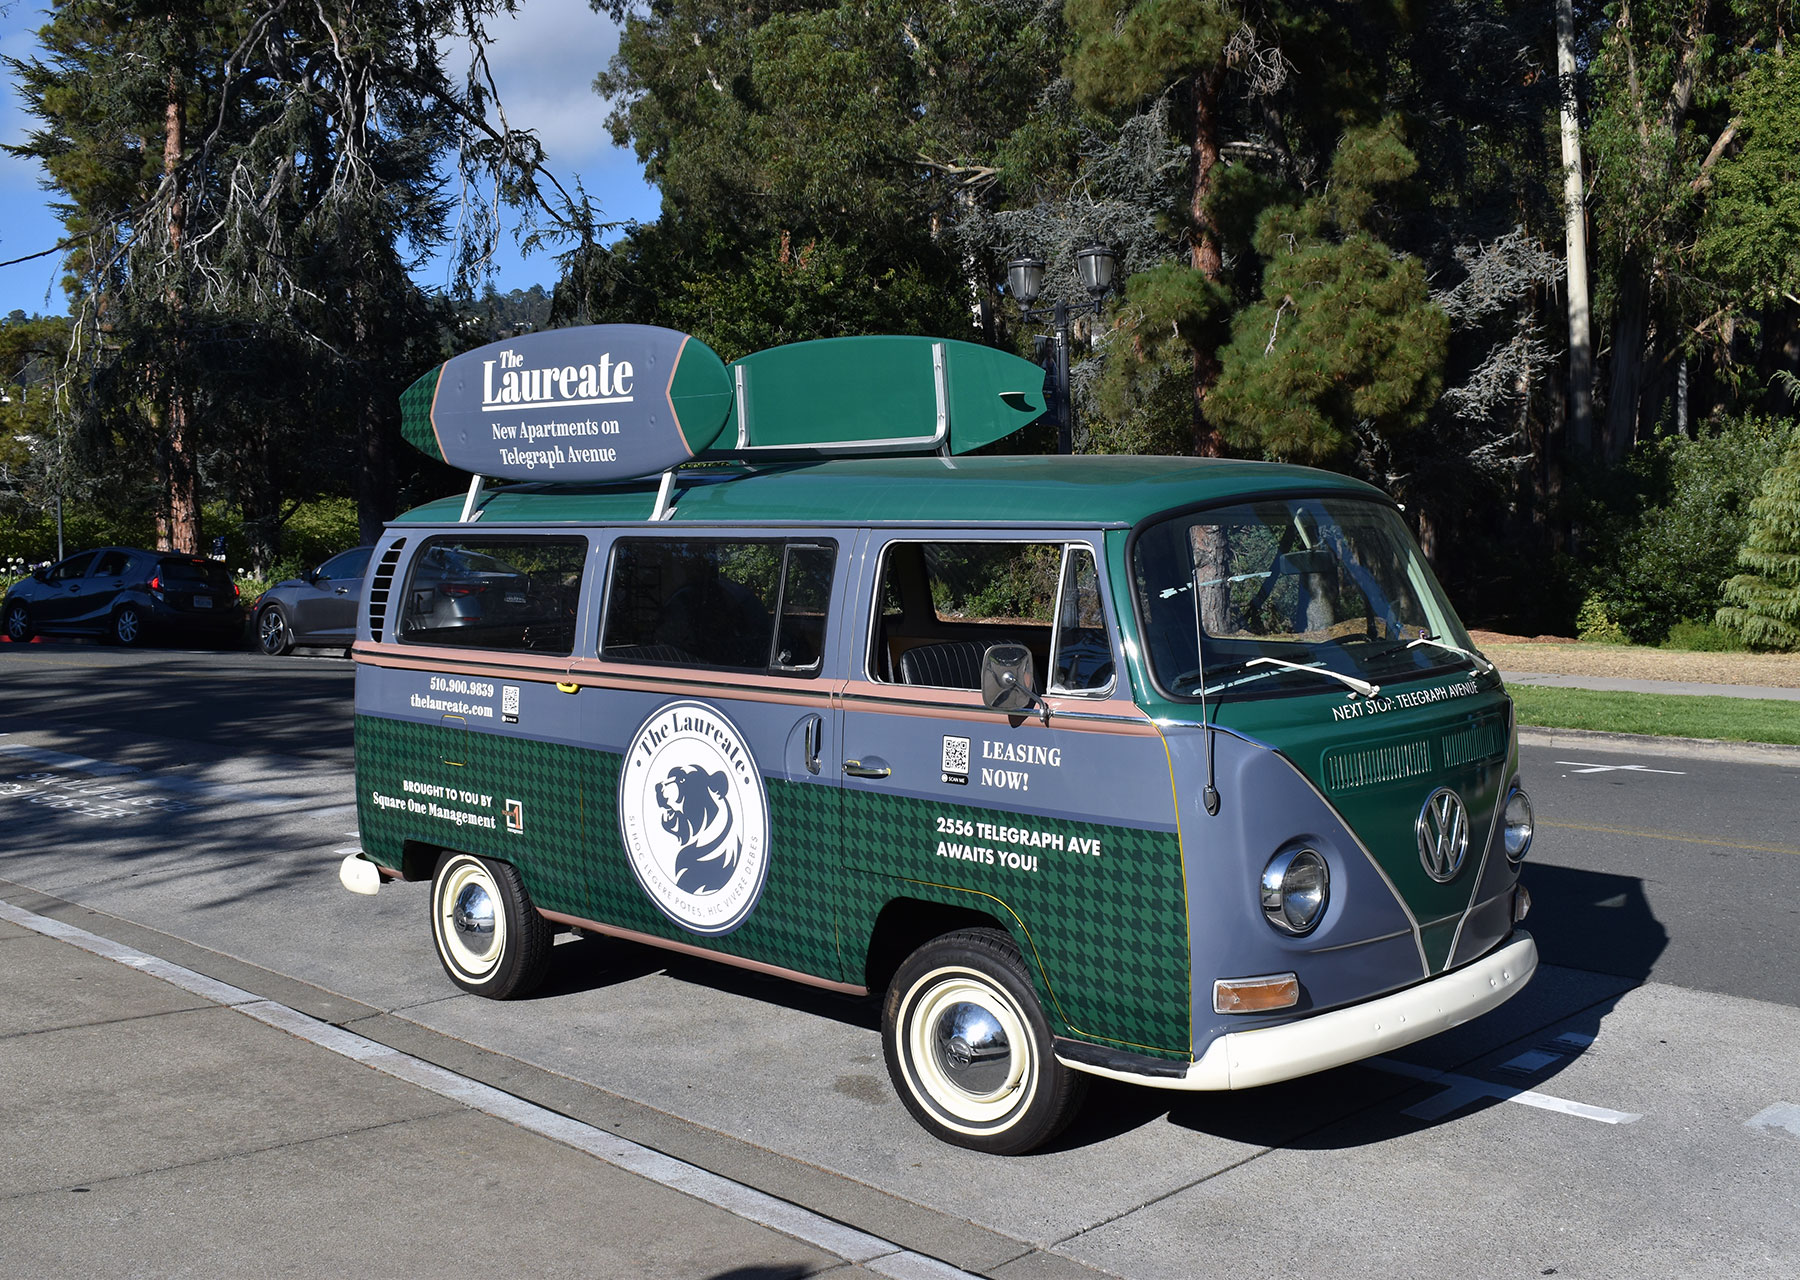 The Laureate mobile leasing bus